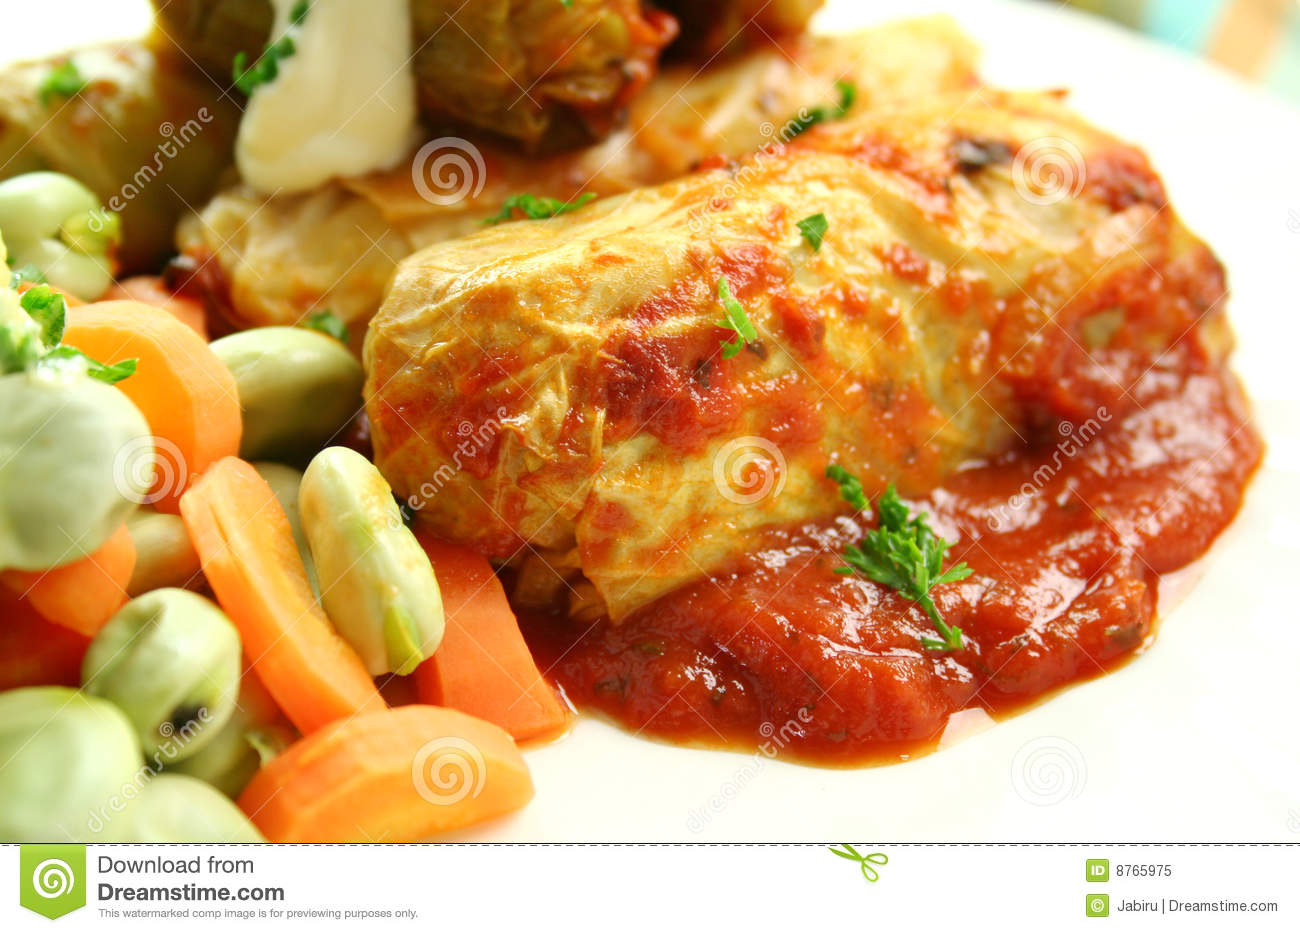 Cabbage Rolls Royalty Free Stock Photo   Image  8765975